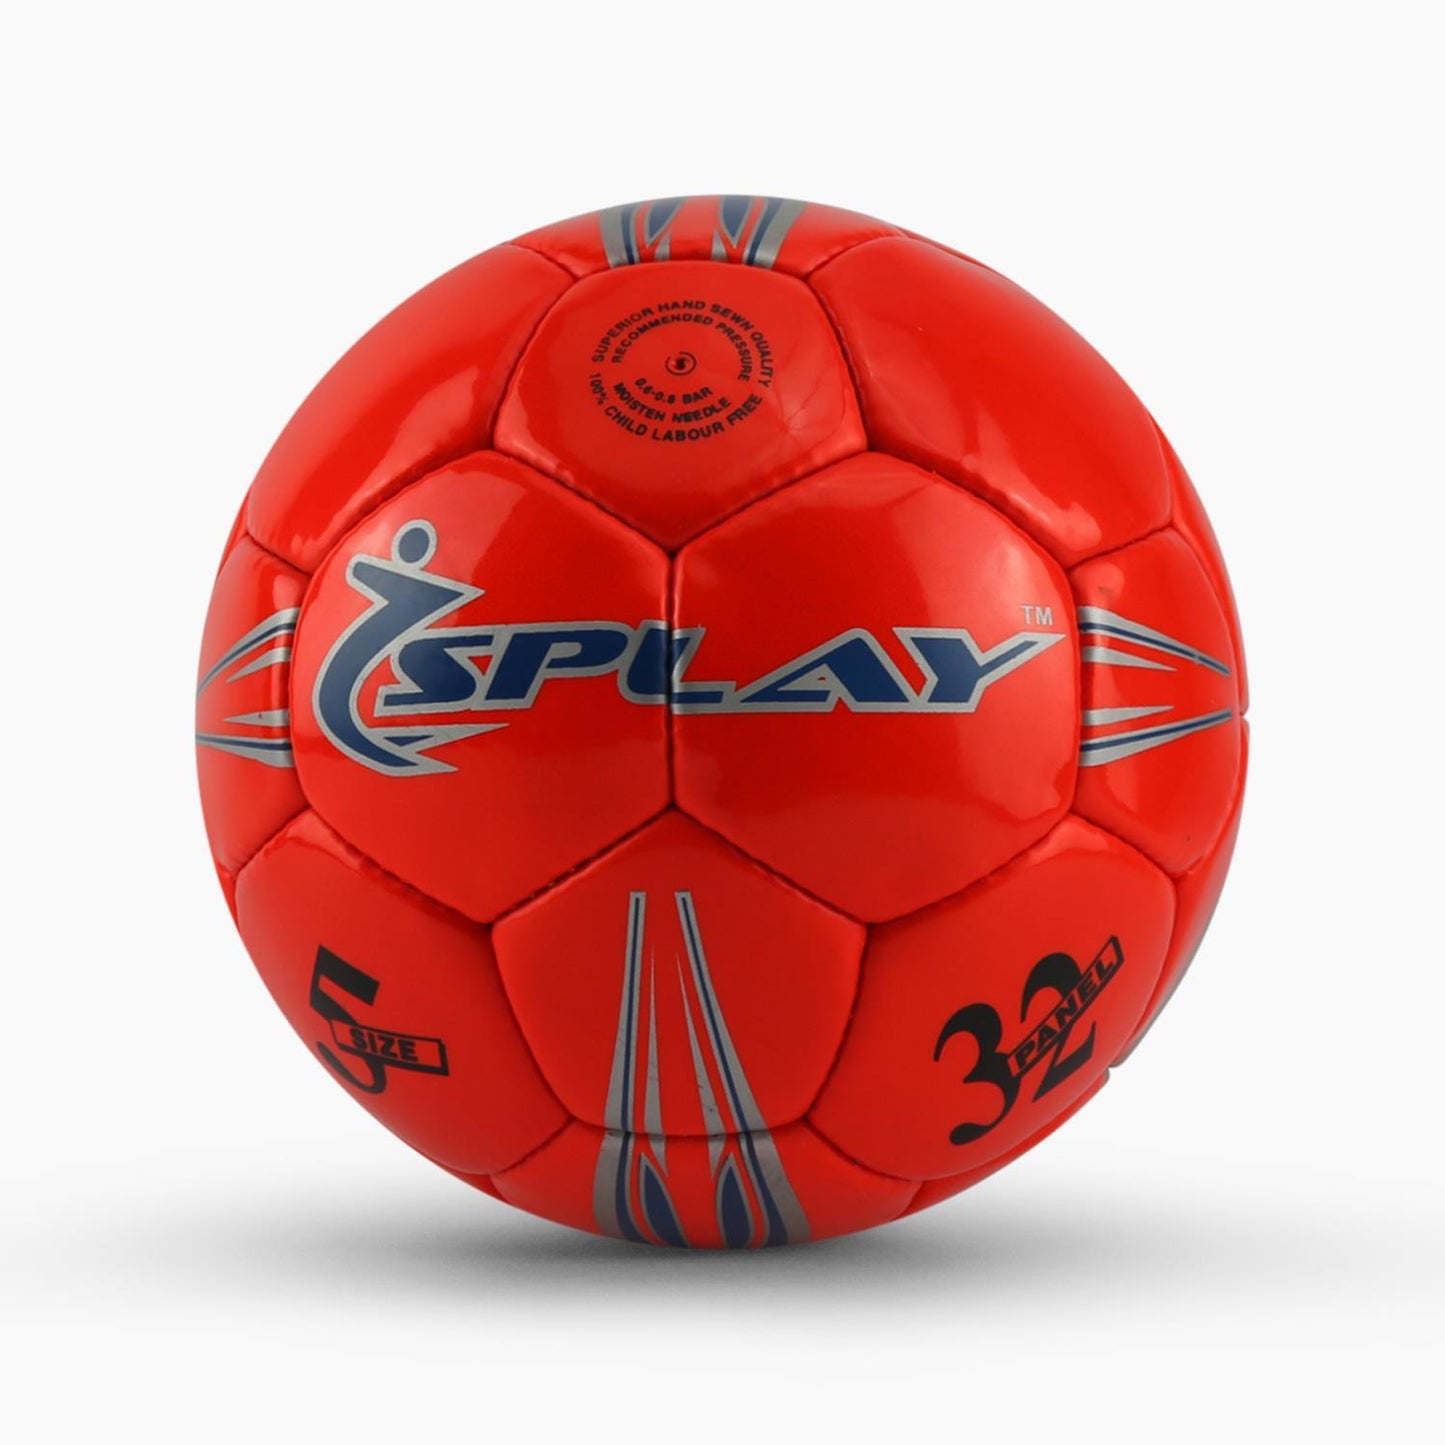 Buy Splay Coral Training Ball-Football-Splay (UK) Limited-Red-5-Splay UK Online